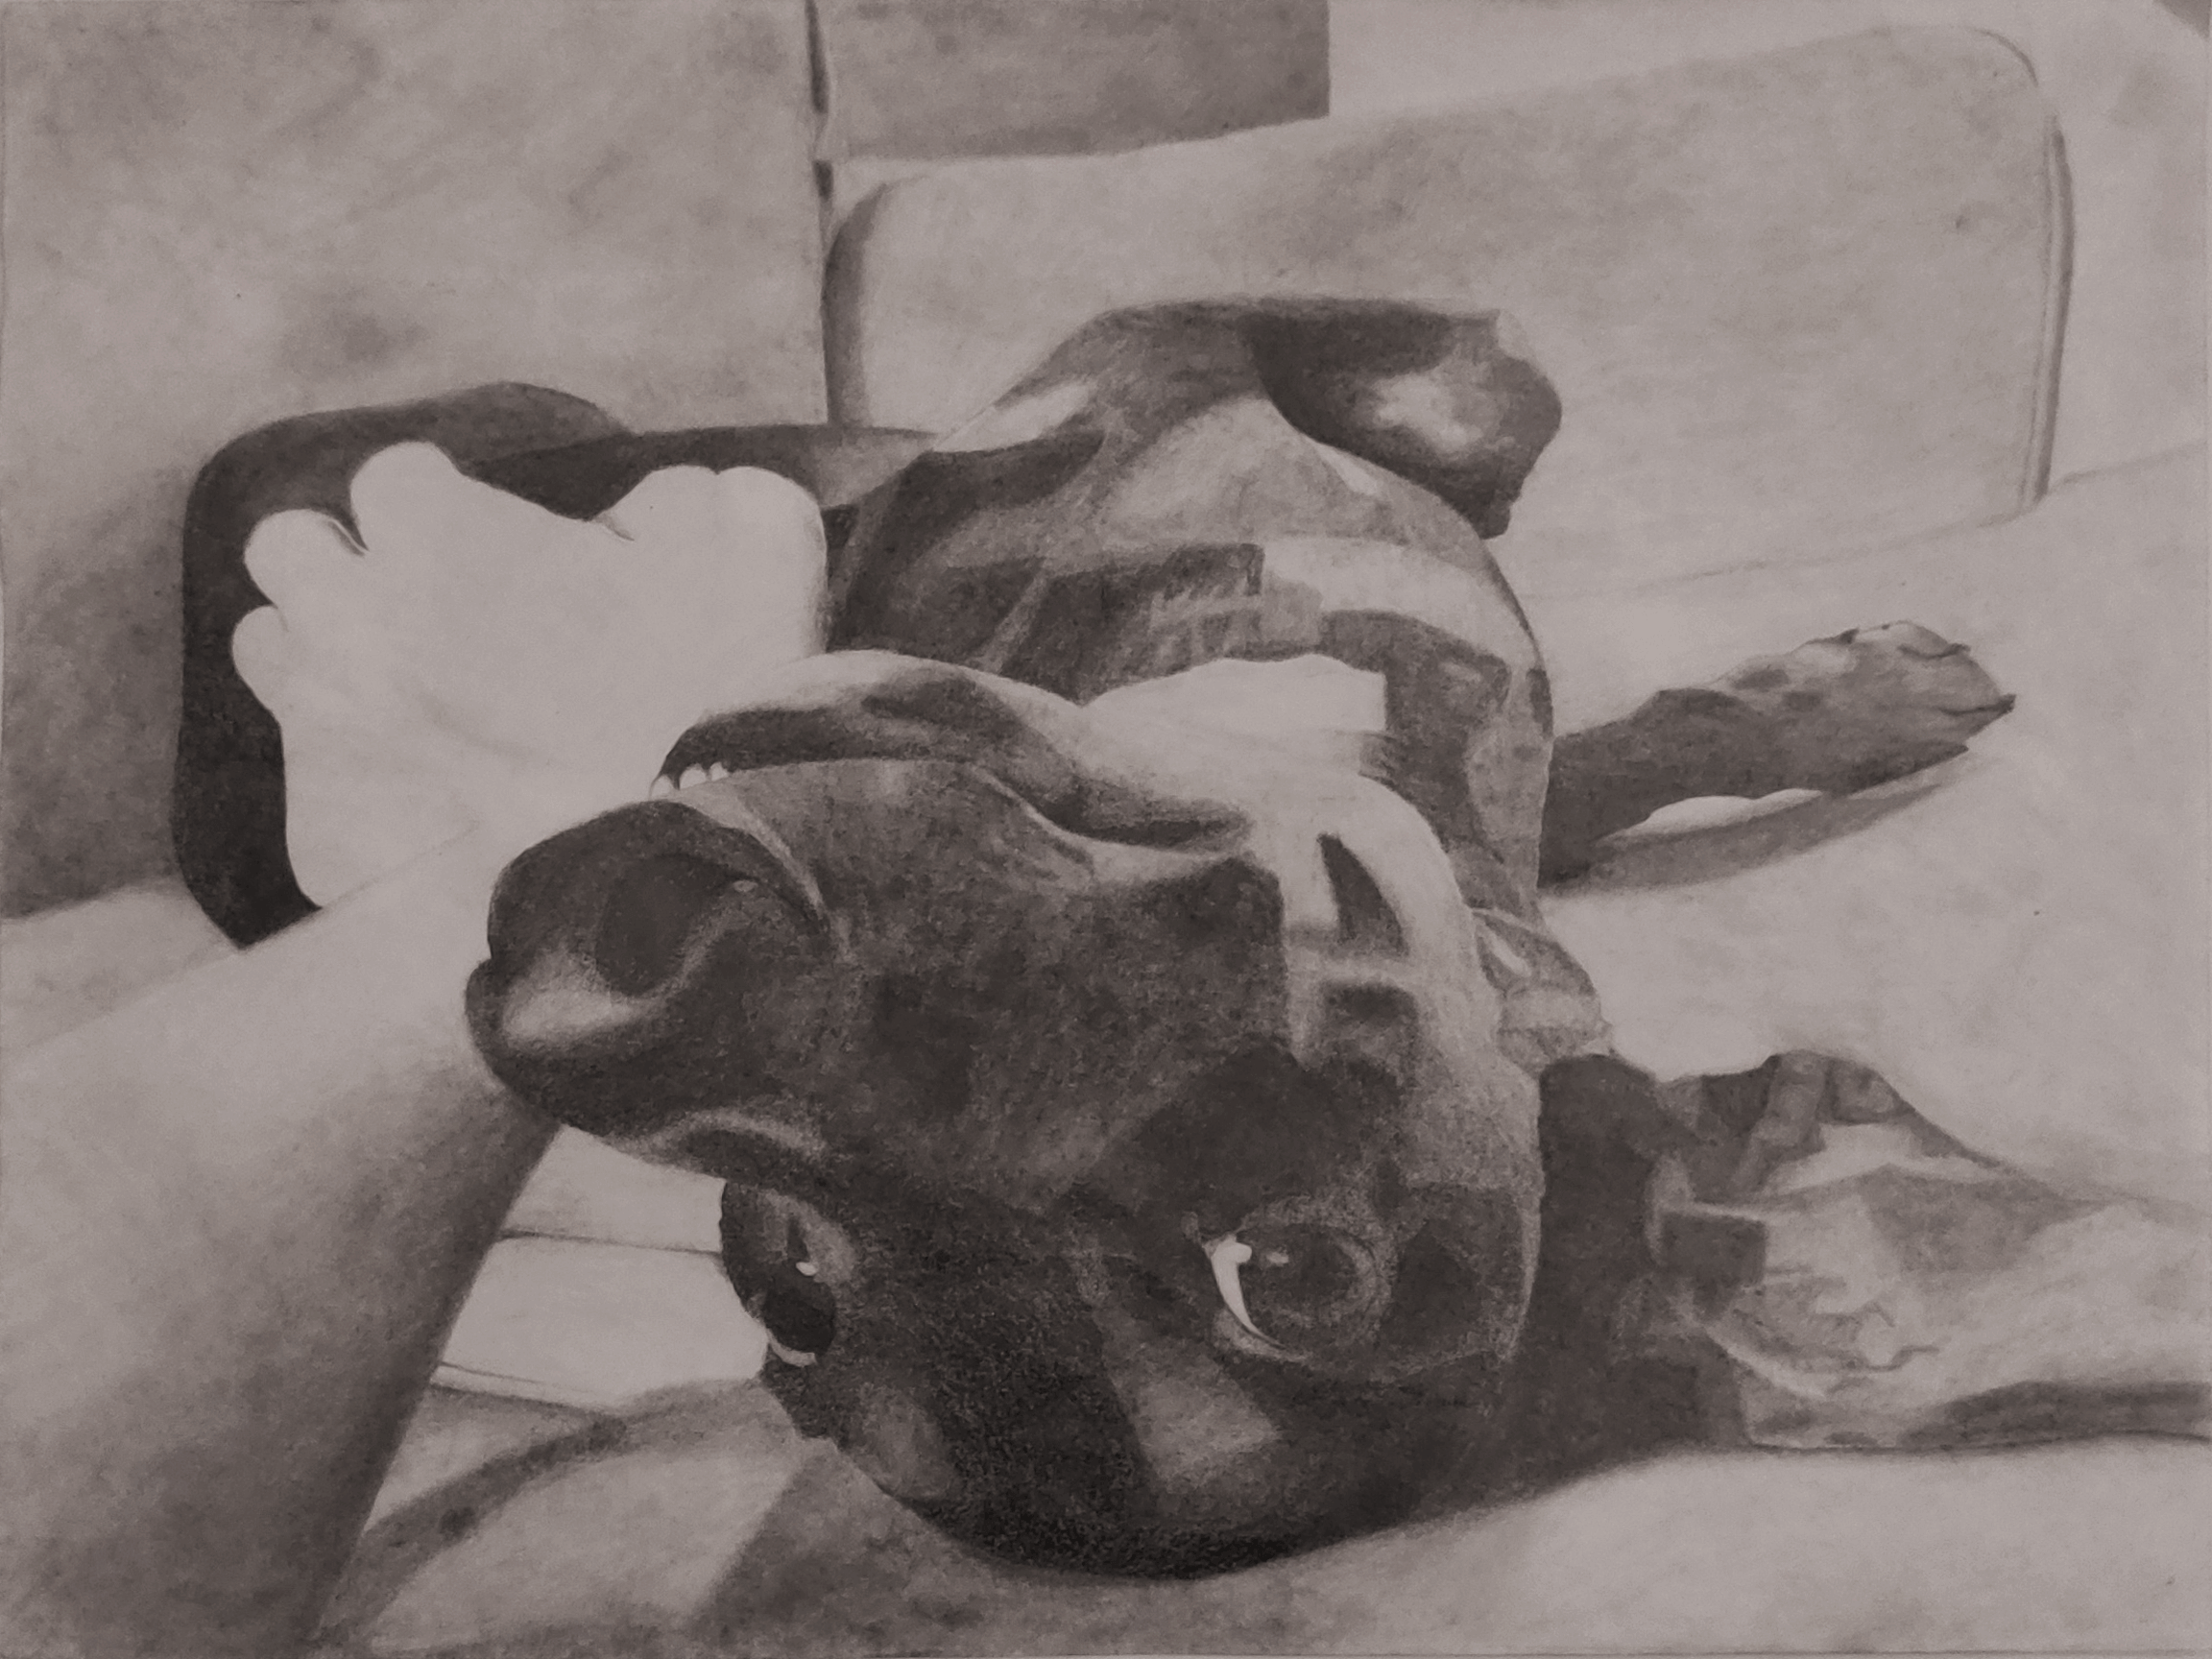 A pencil drawing of Khiron, my puppy, on a poster-sized piece of paper.